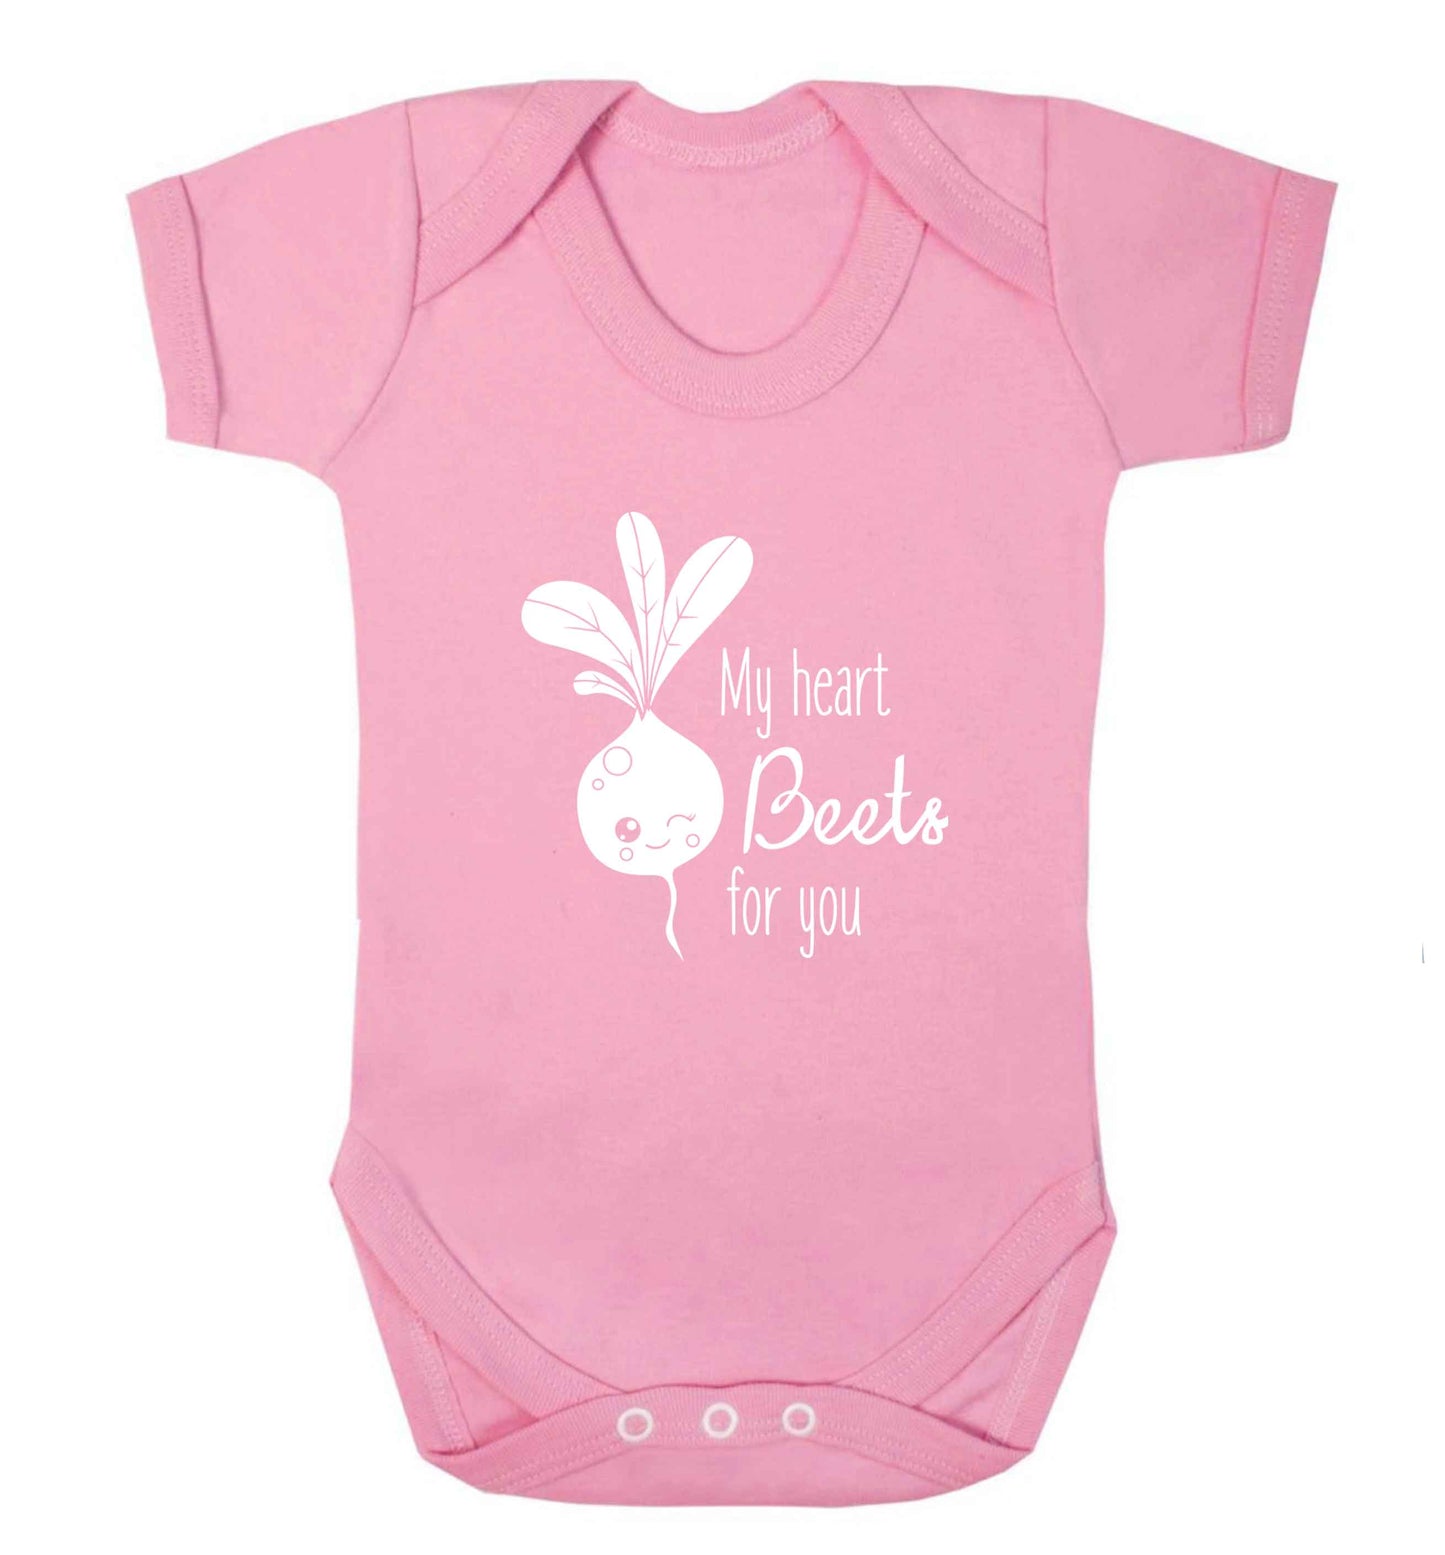 My heart beets for you baby vest pale pink 18-24 months